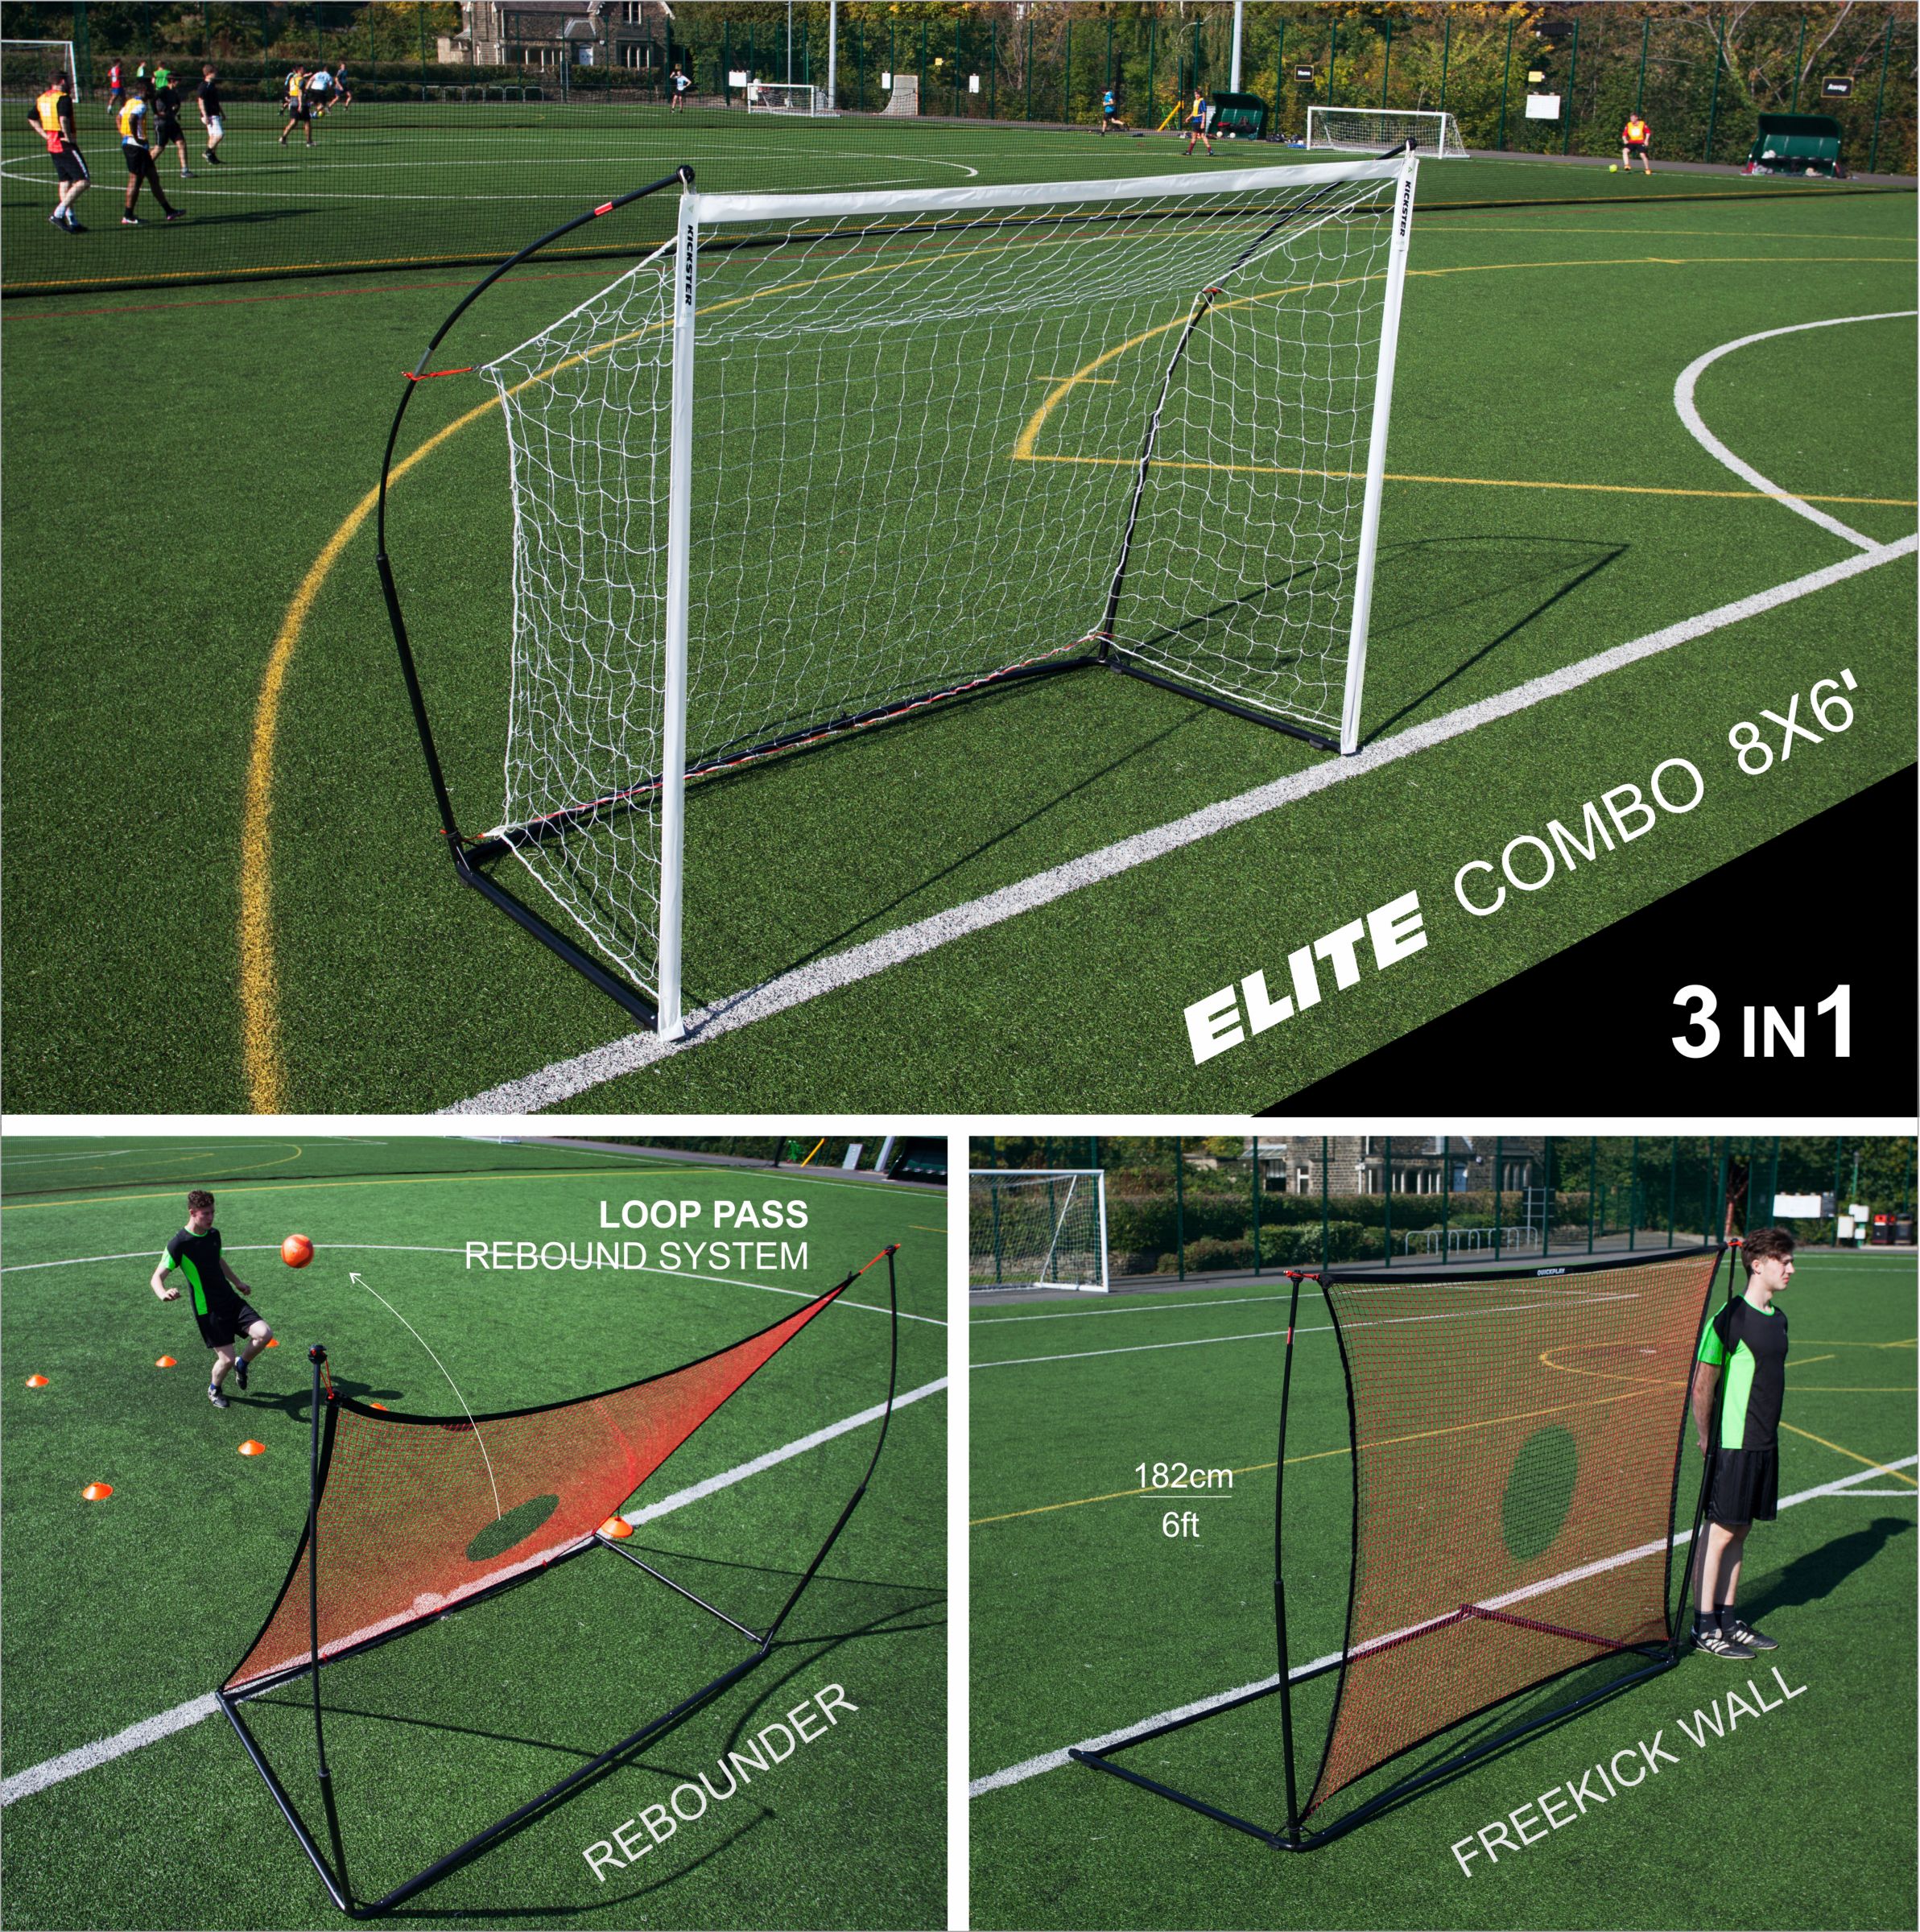 QUICKPLAY Elite Combo 3 in 1 Rebounder and Free Kick Wall Portable Football Goal